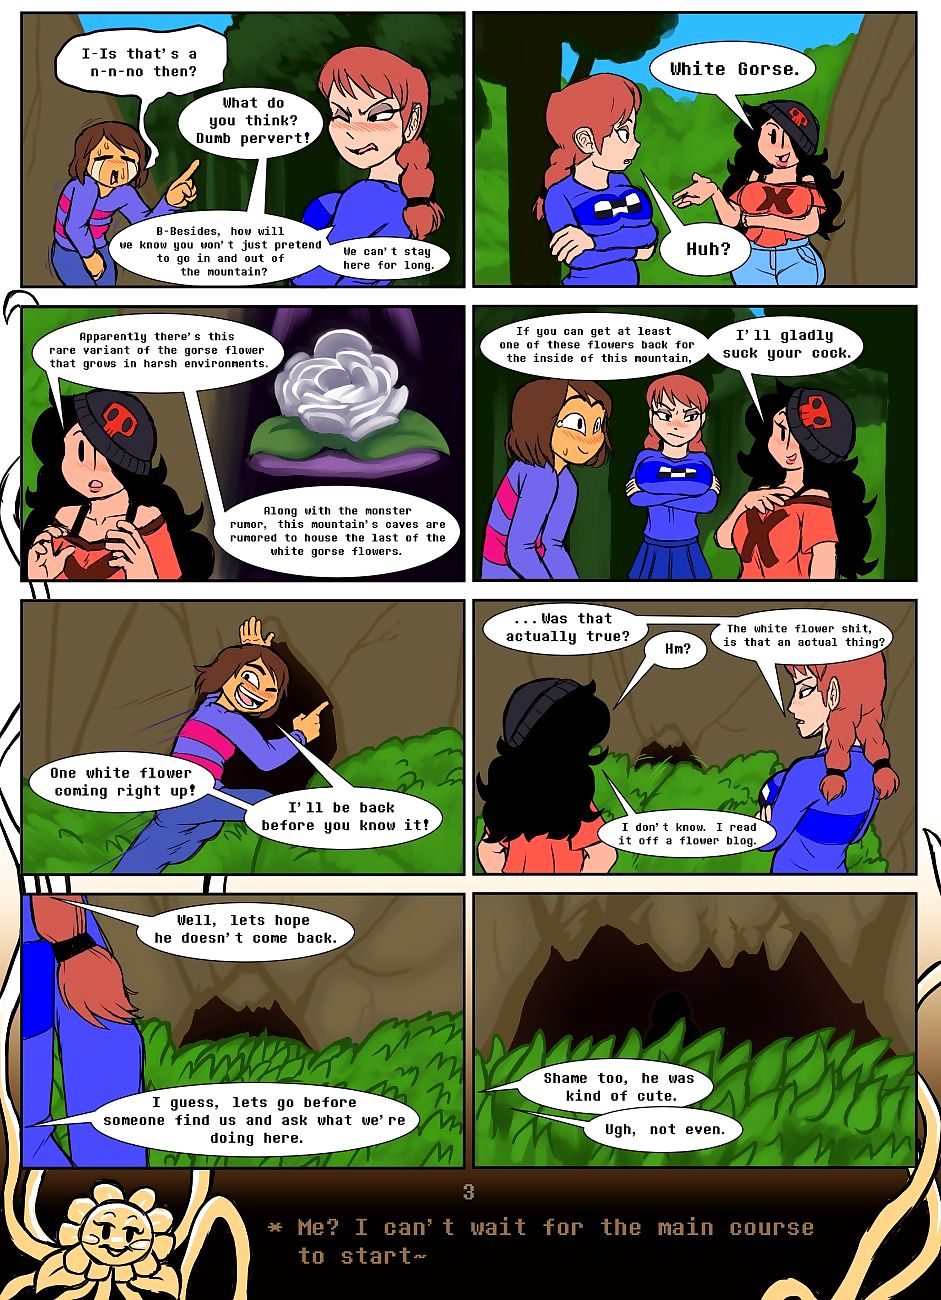 undertail 1 thiết lập lại page 1